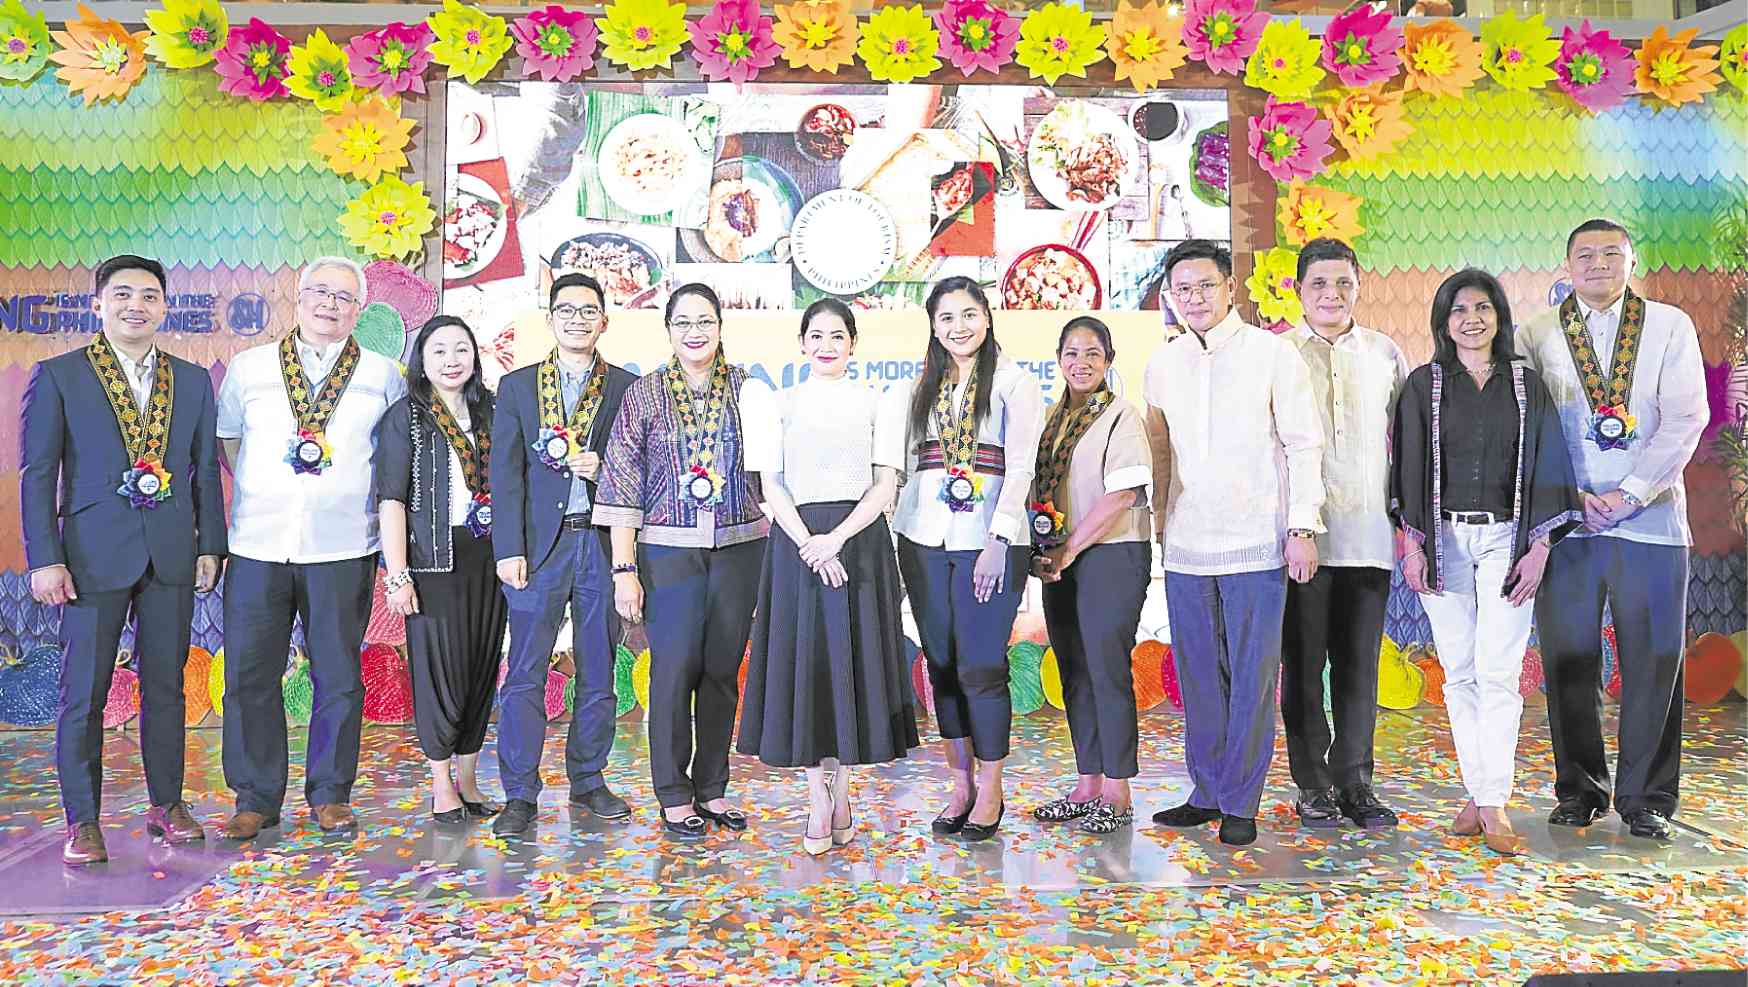 CAMPAIGNPARTNERS SMSupermalls have partnered with theDepartment of Tourism (DOT) for the “Malling isMore Fun in the Philippines” campaign inSMmalls nationwide. In photo: Jollibee’s Francis Flores,SMSupermarket’s Joey Mendoza, DOT’sAssistant SecretaryVerna Buensuceso and Assistant SecretaryHowie Uyking, Mandaluyong Mayor MenchieAbalos,DOTSecretary Bernadette Romulo-Puyat,Mandaluyong CouncilorCharisse Abalos, Margarita Fores,SMSupermalls’ Steven Tan and IanMathay,DOTNCR Officer in Charge CatherineAgustin, andSMSupermalls’ Jonjon San Agustin at theMay 17 launch atSMMega Fashion Hall. For more details, visit www.smsupermalls.com